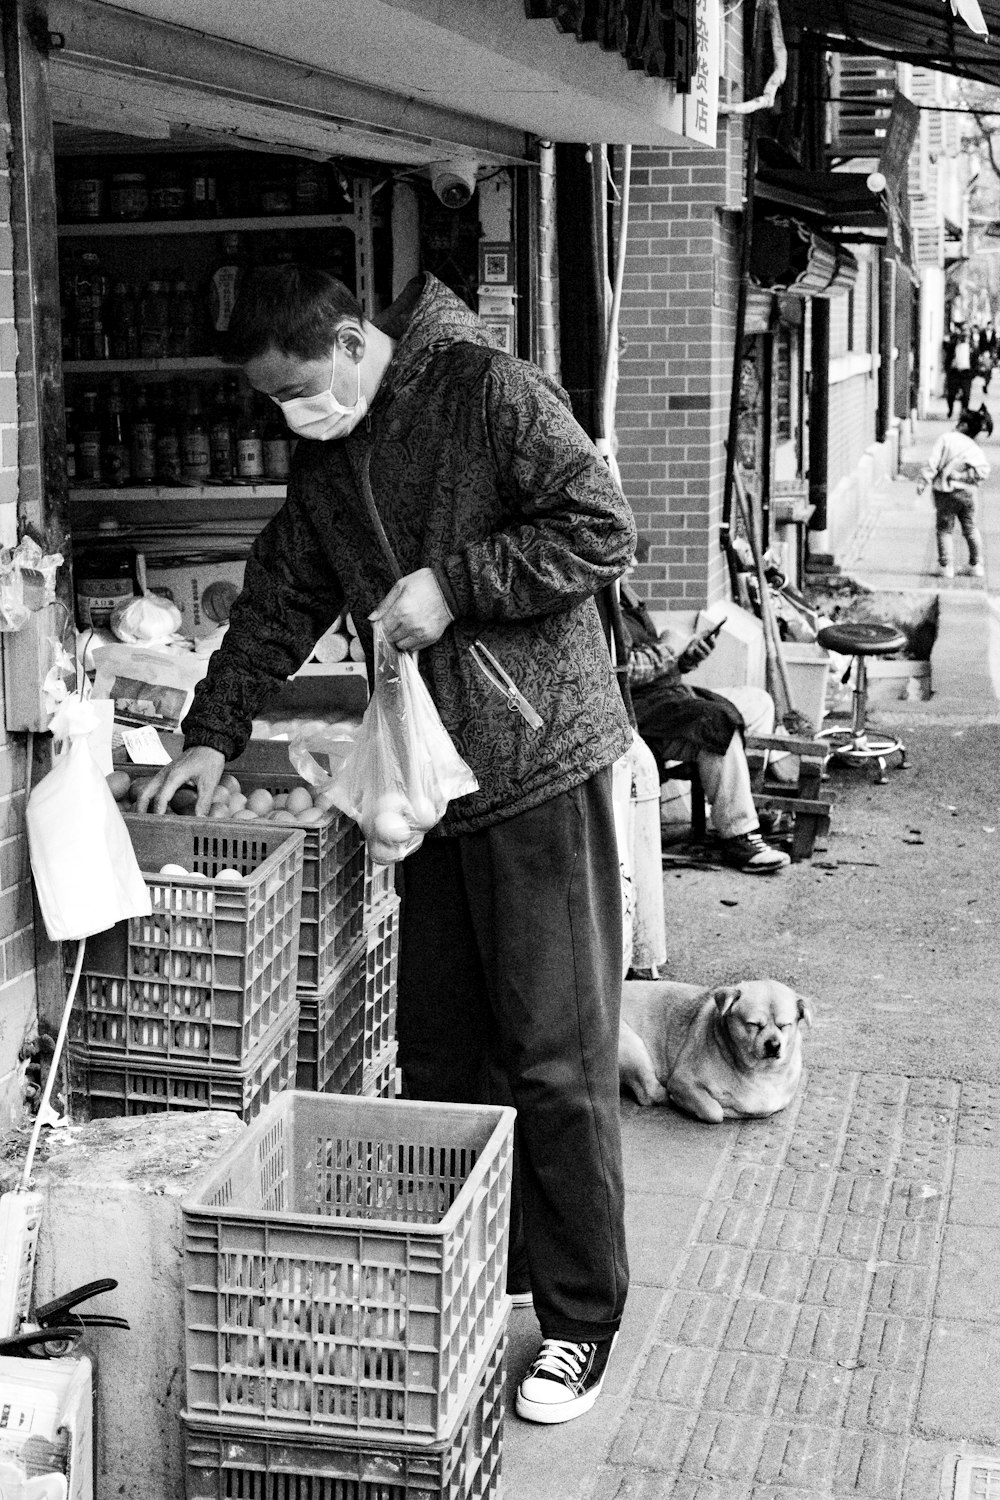 man in black jacket holding a basket with a dog in grayscale photography